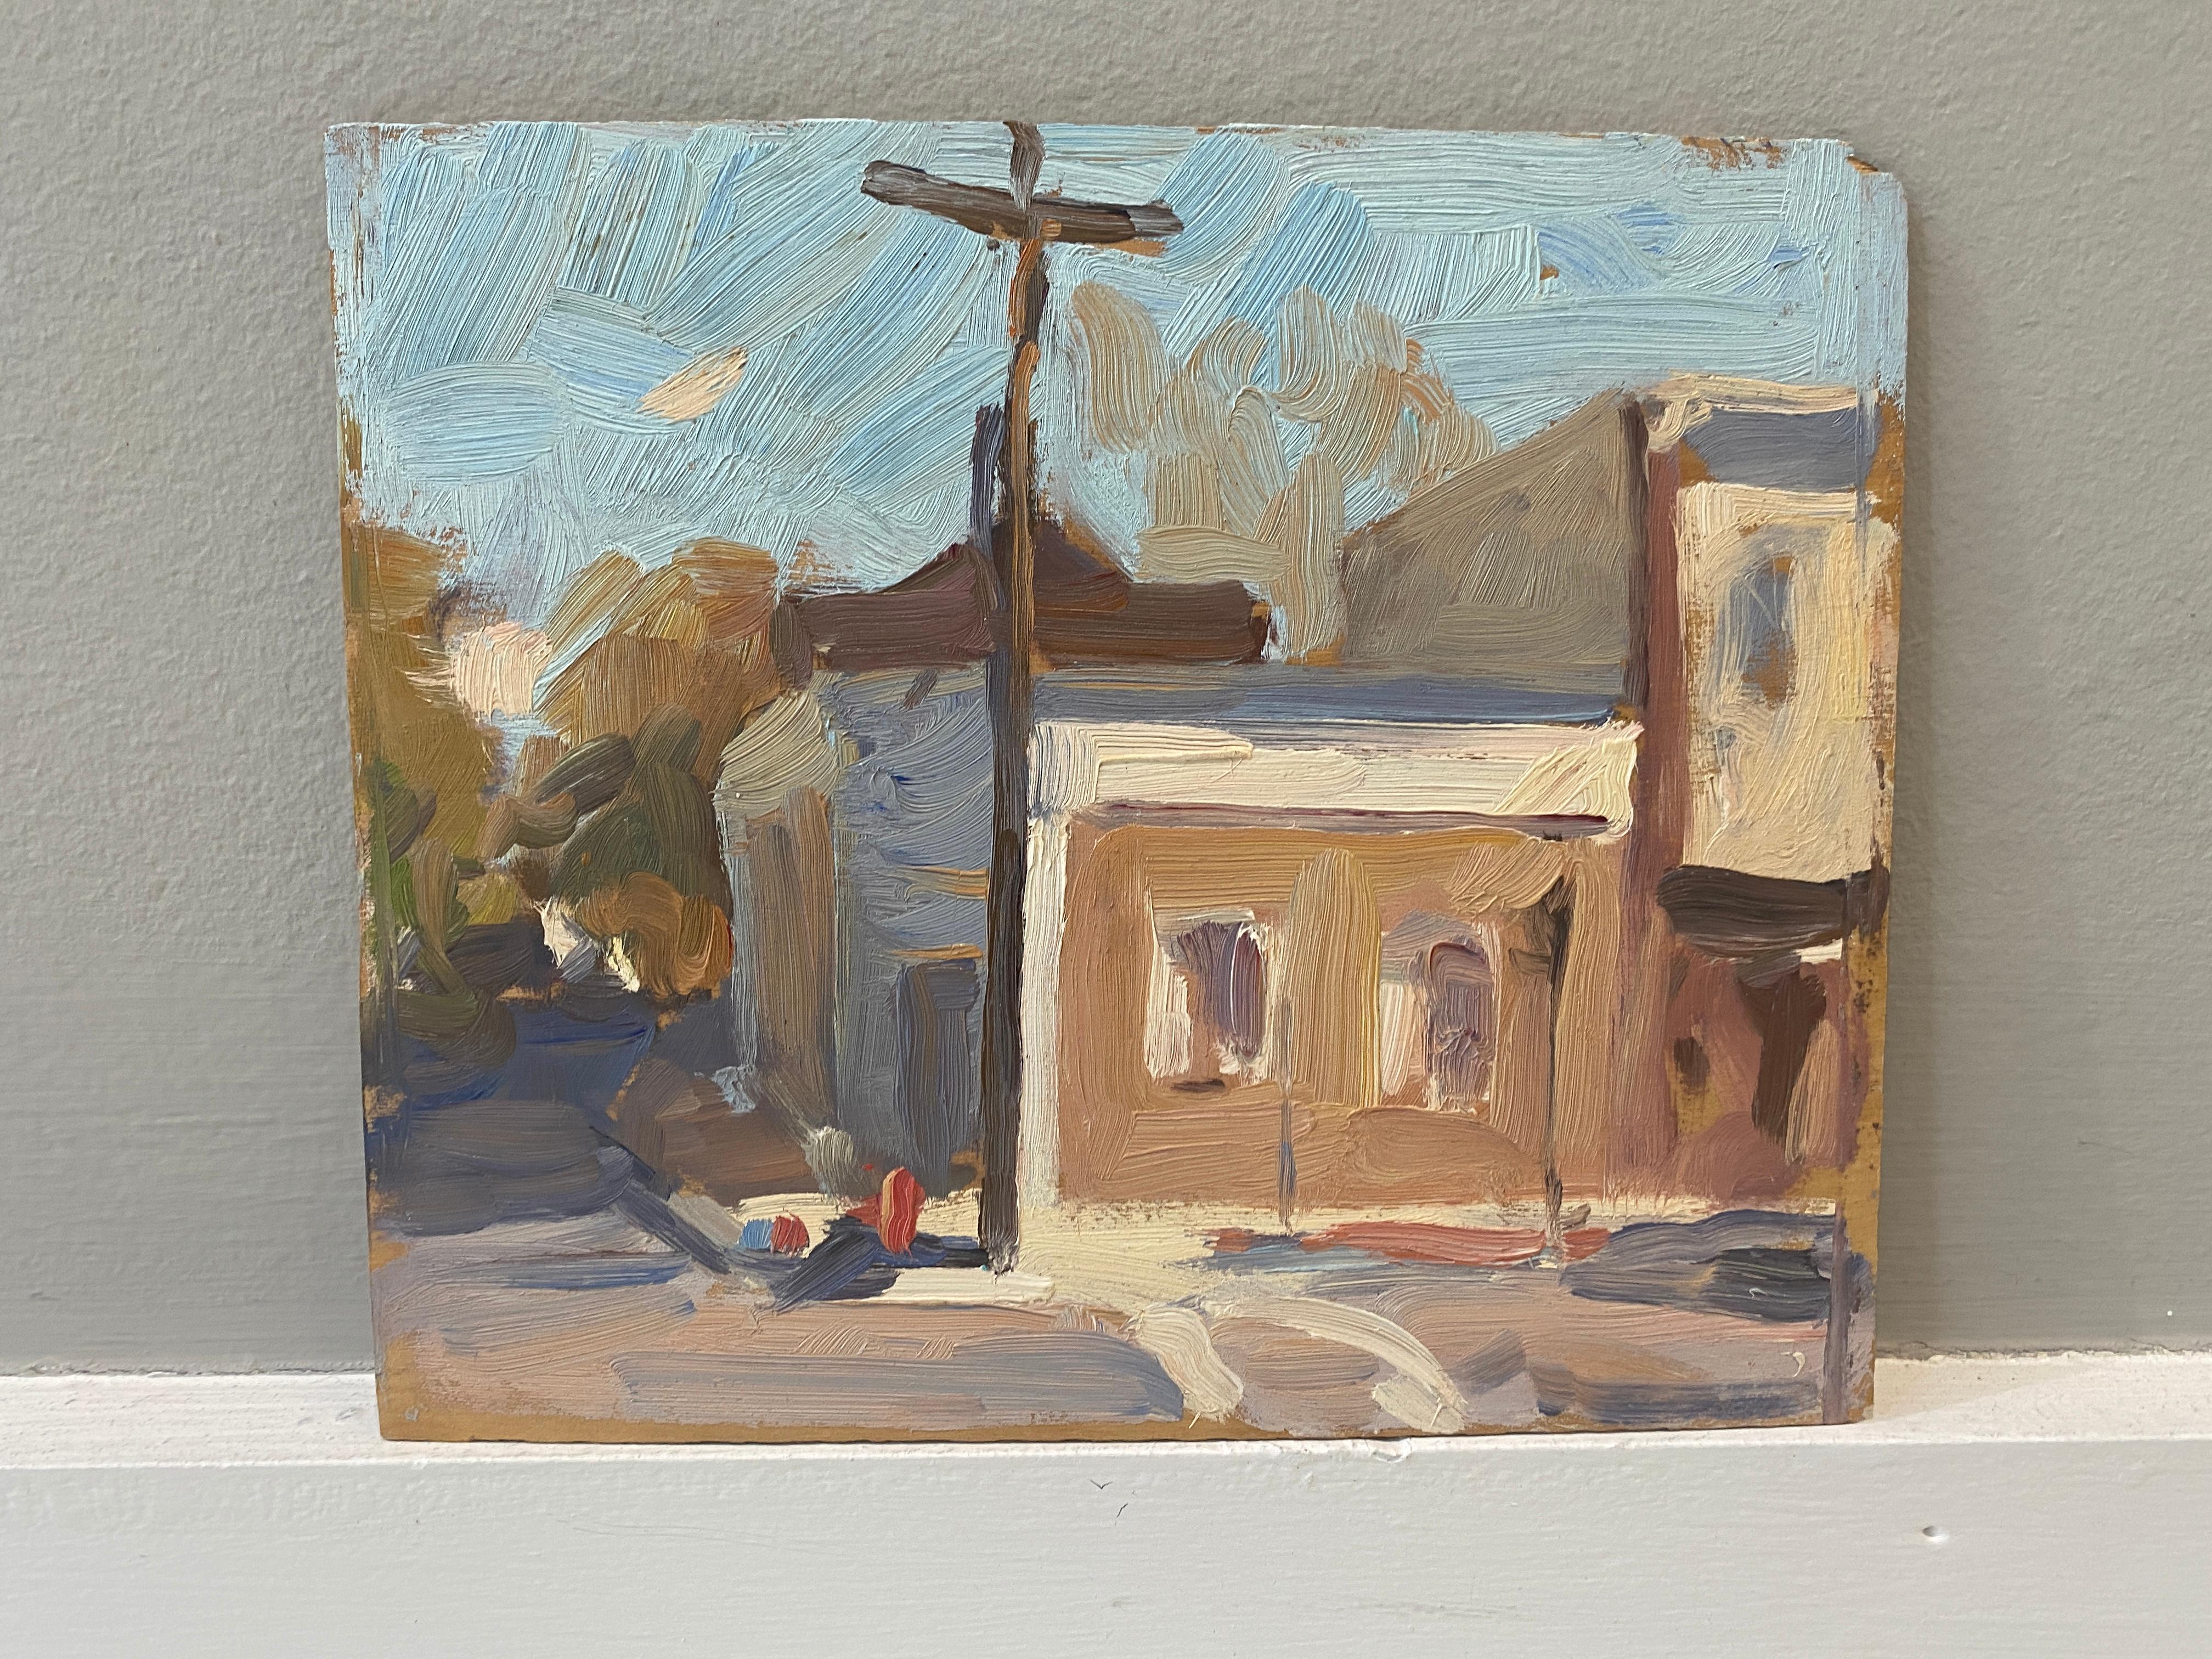 Between Main Street and Washington - Painting by Ben Fenske